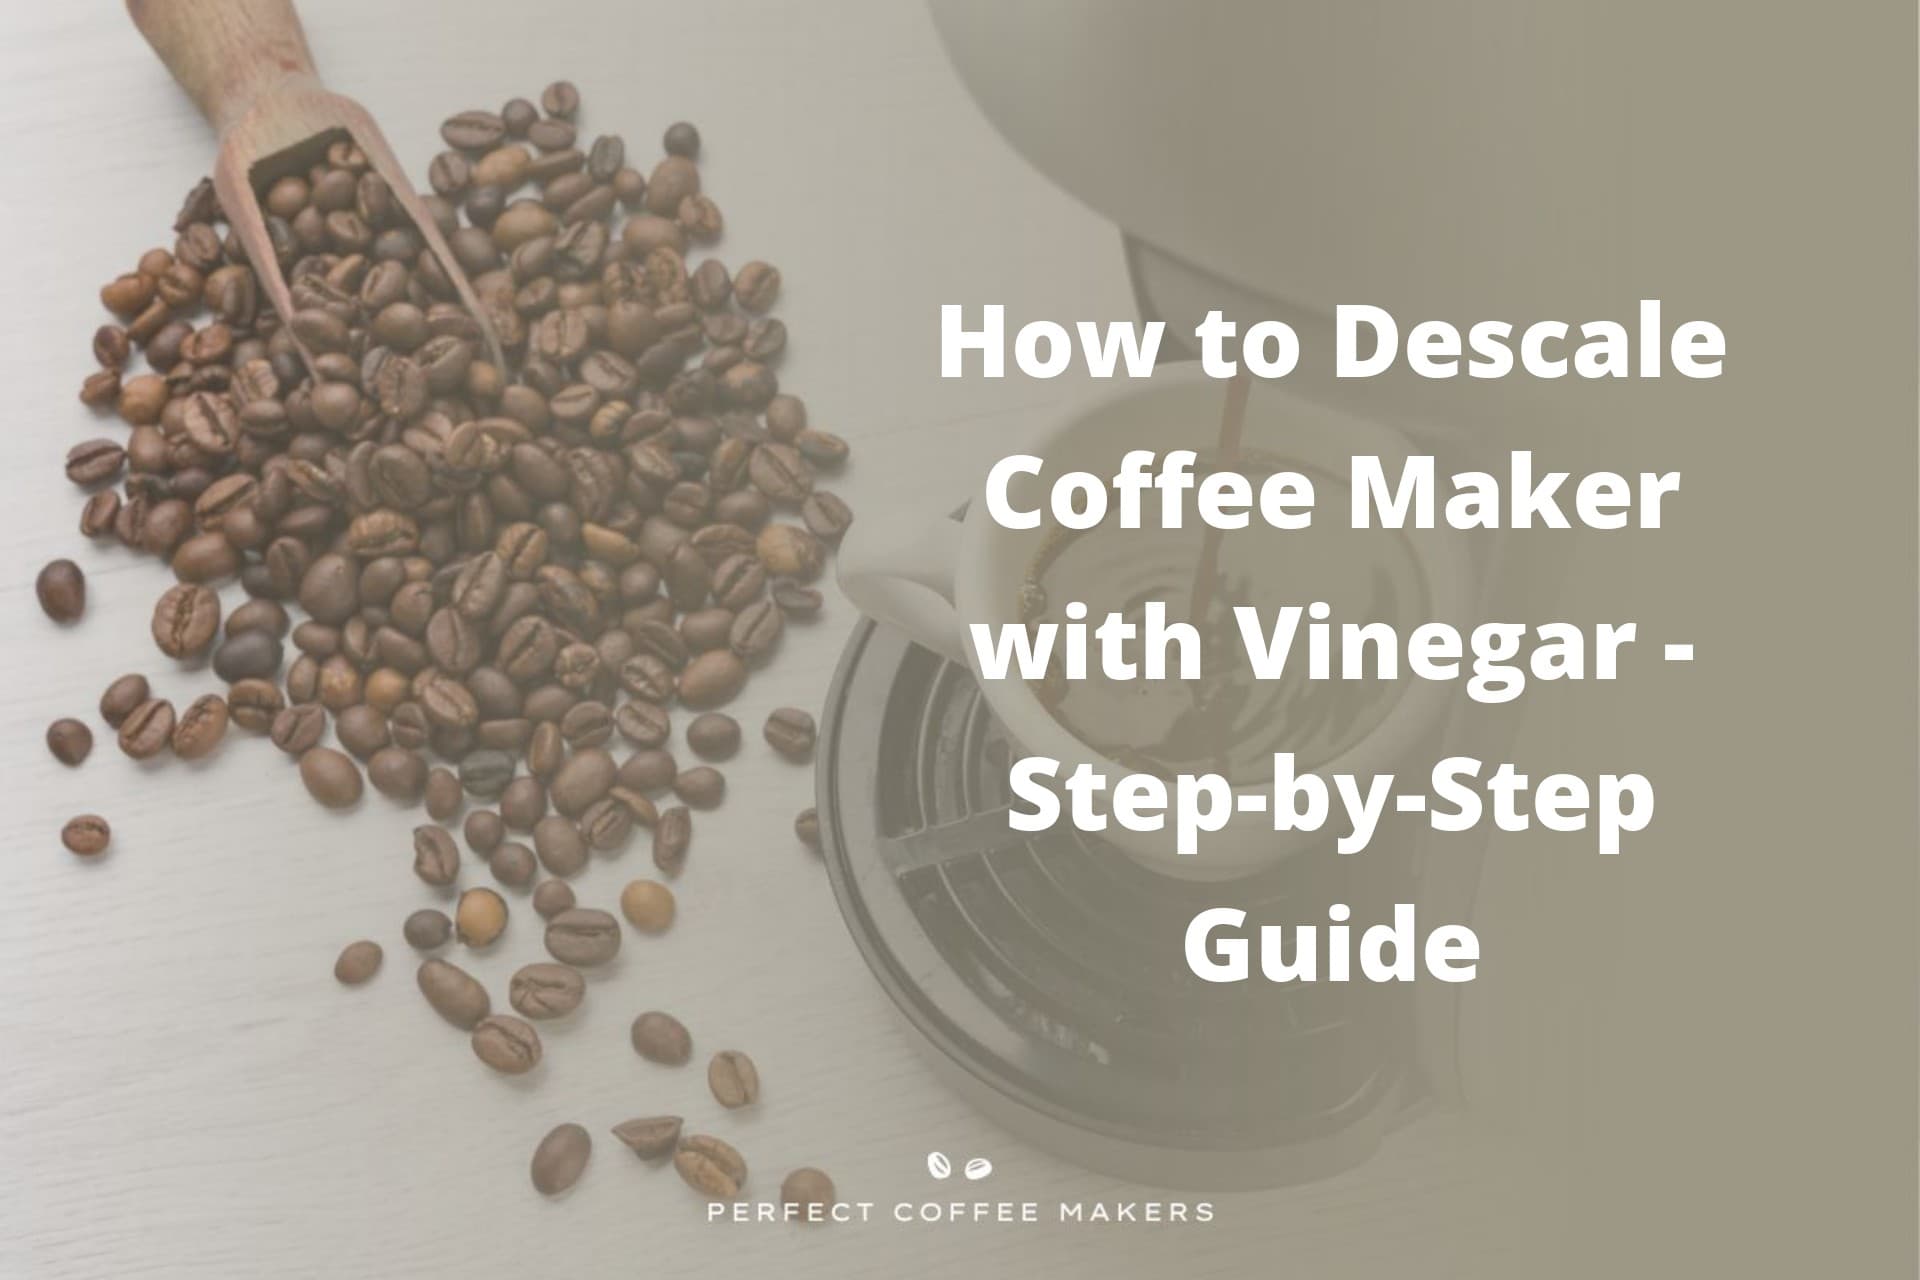 How to Descale Coffee Maker with Vinegar – Step-by-Step Guide